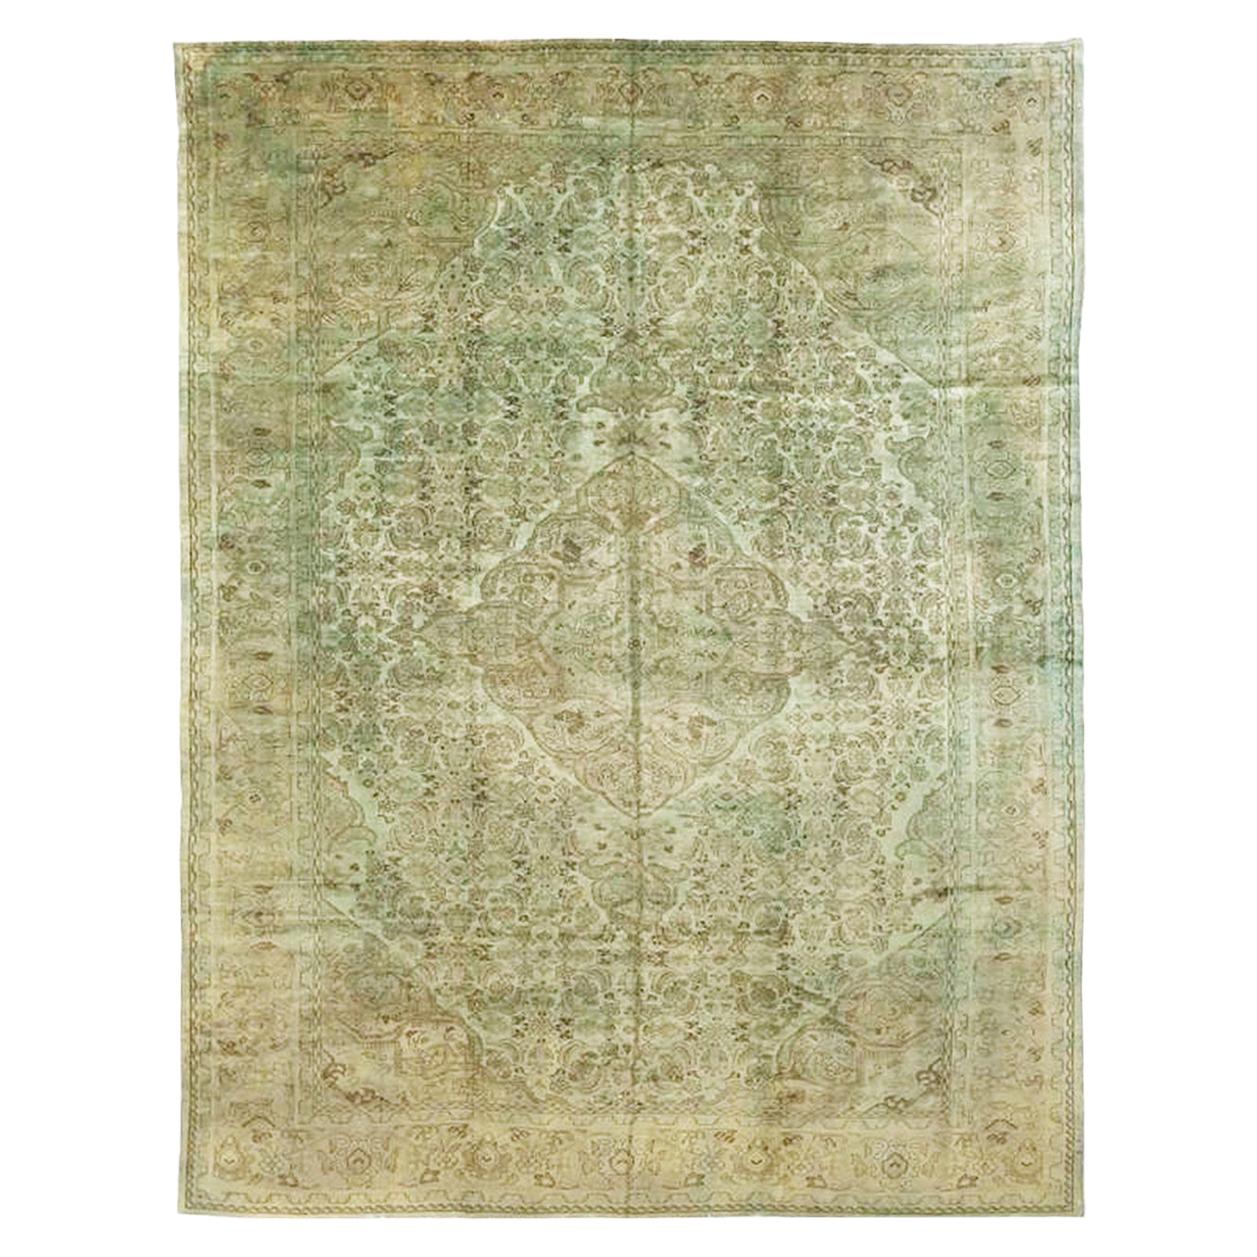 Vintage Persian Overdyed Rug in Green and Brown Motif